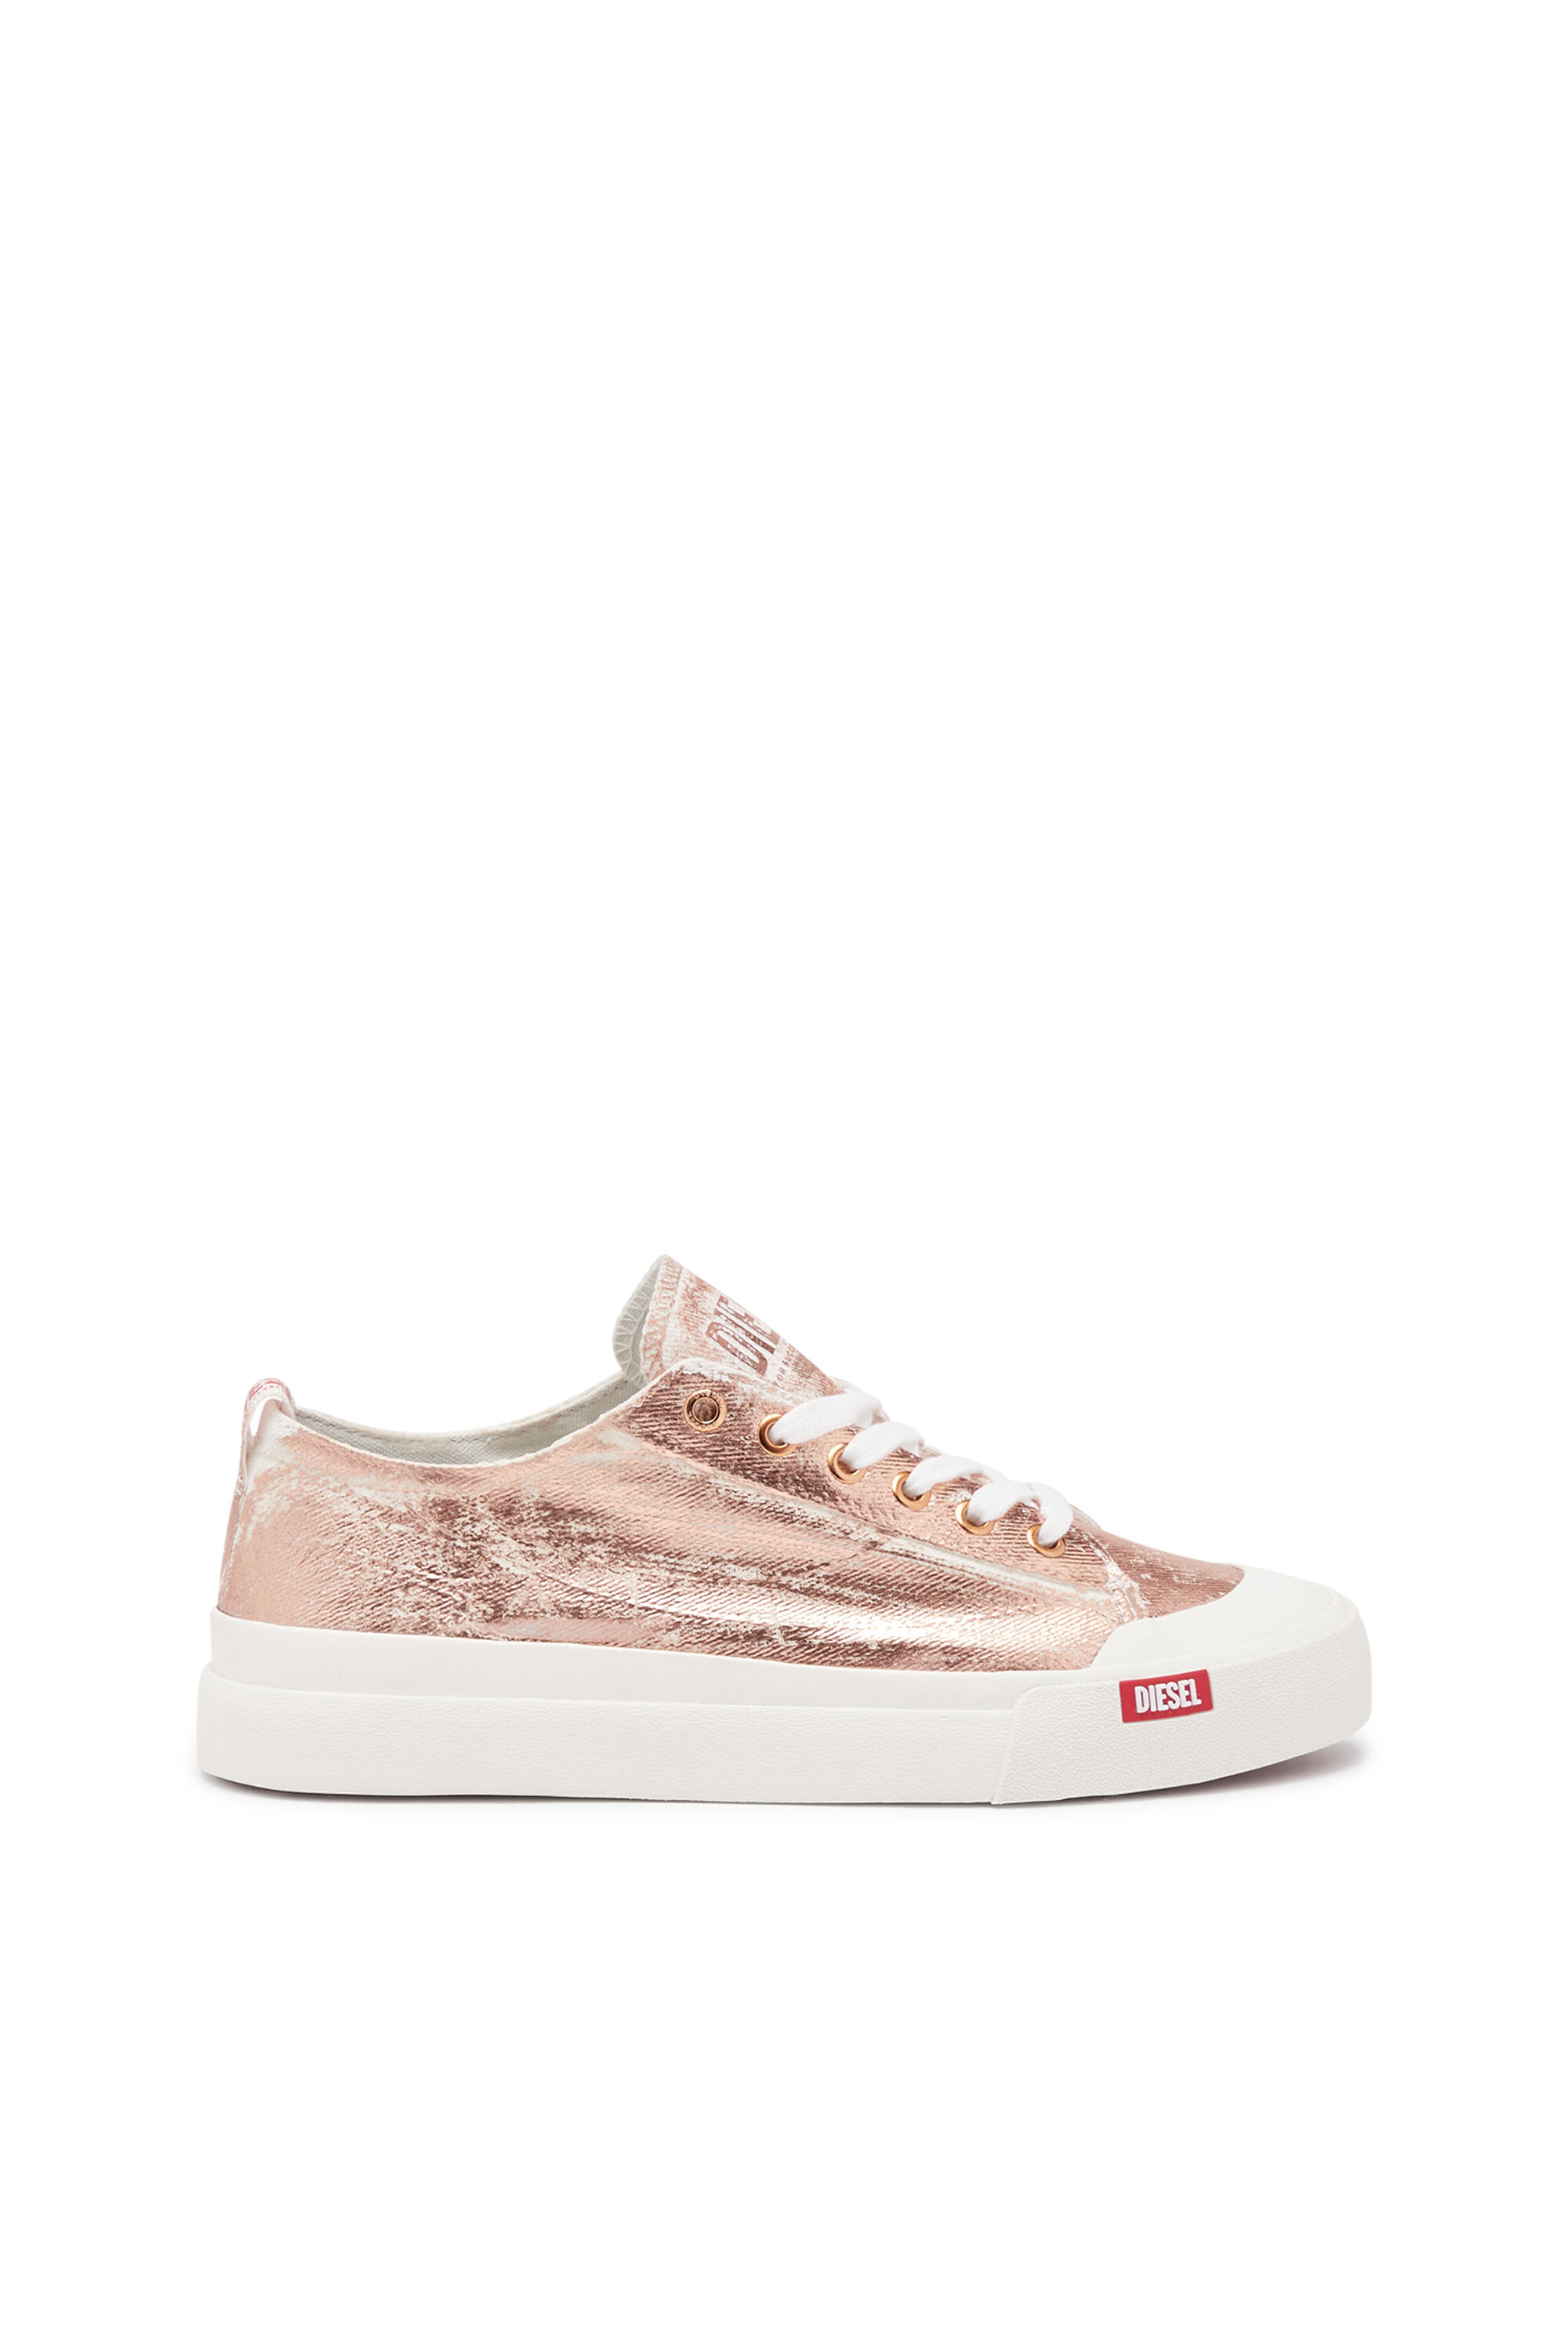 Diesel - S-ATHOS LOW W, Donna S-Athos Low-Sneaker in canvas metallizzato distressed in Rosa - Image 1